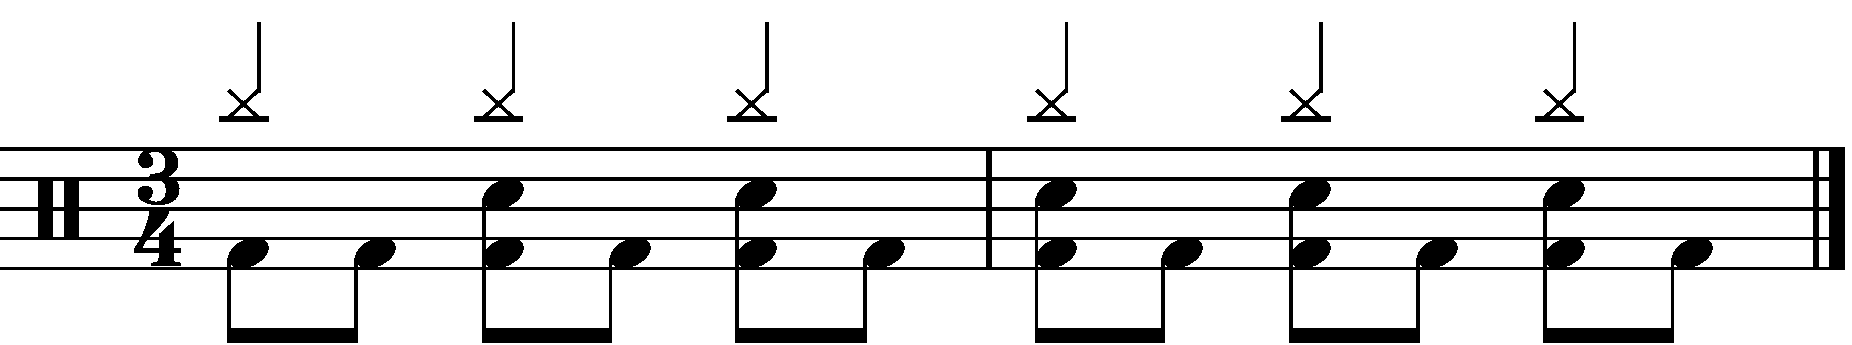 A groove based foot speed exercise in 3/4.